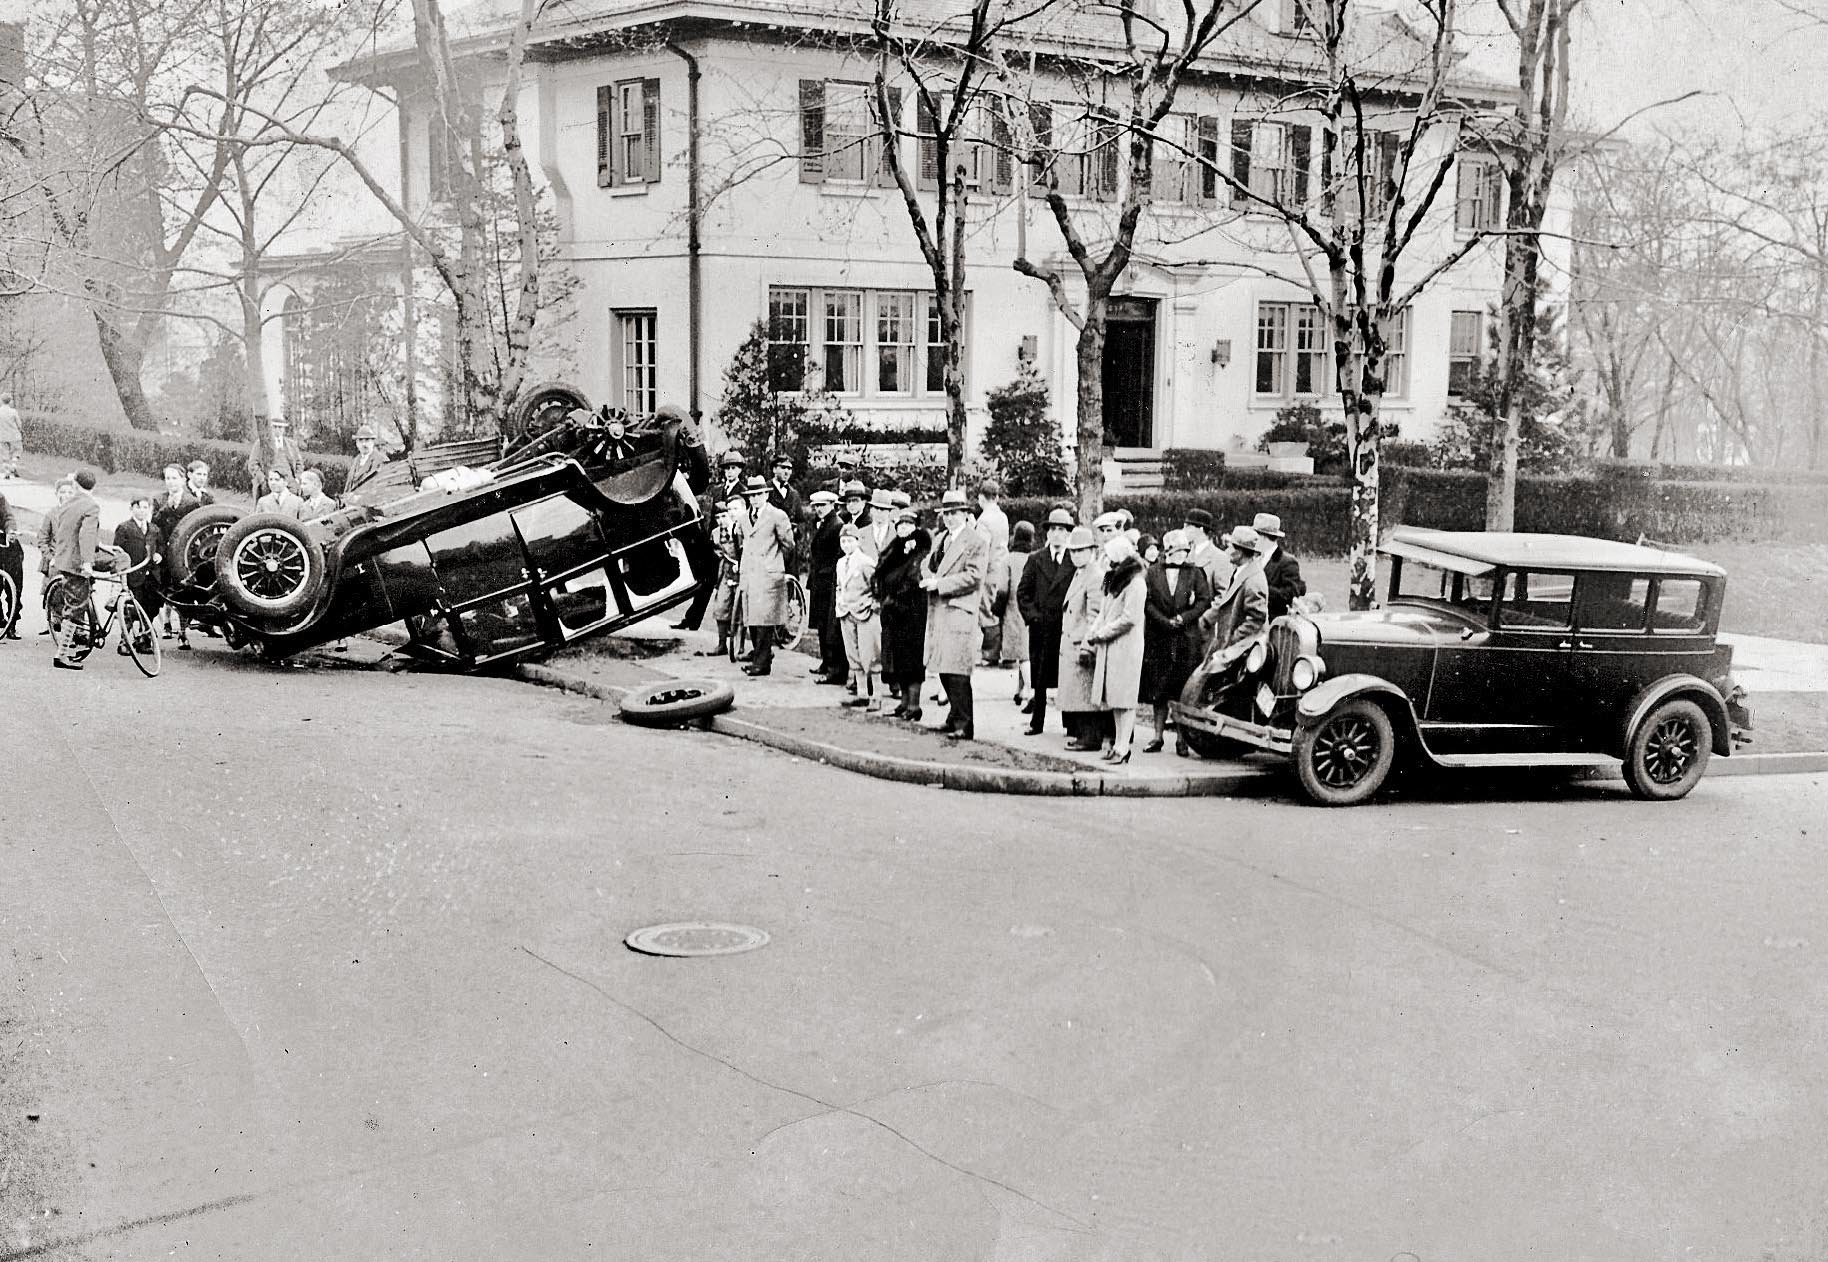 Accident occurred on Parker Street and Ballantine Parkway in Newark, New Jersey. Circa 1929.